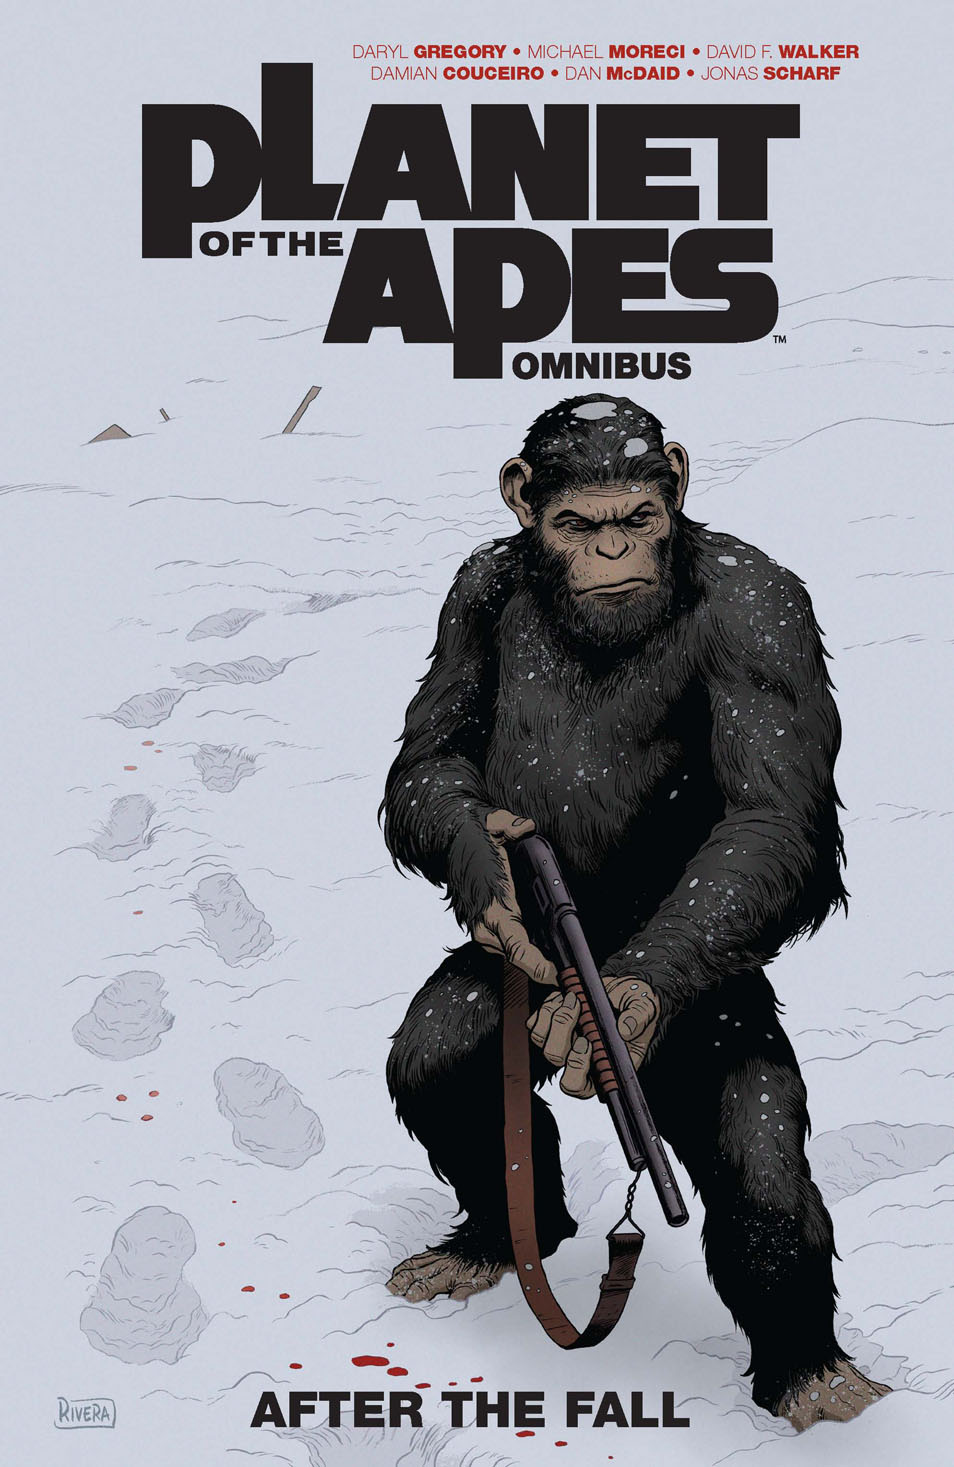 This image is the cover for the book Planet of the Apes After the Fall Omnibus, Planet of the Apes